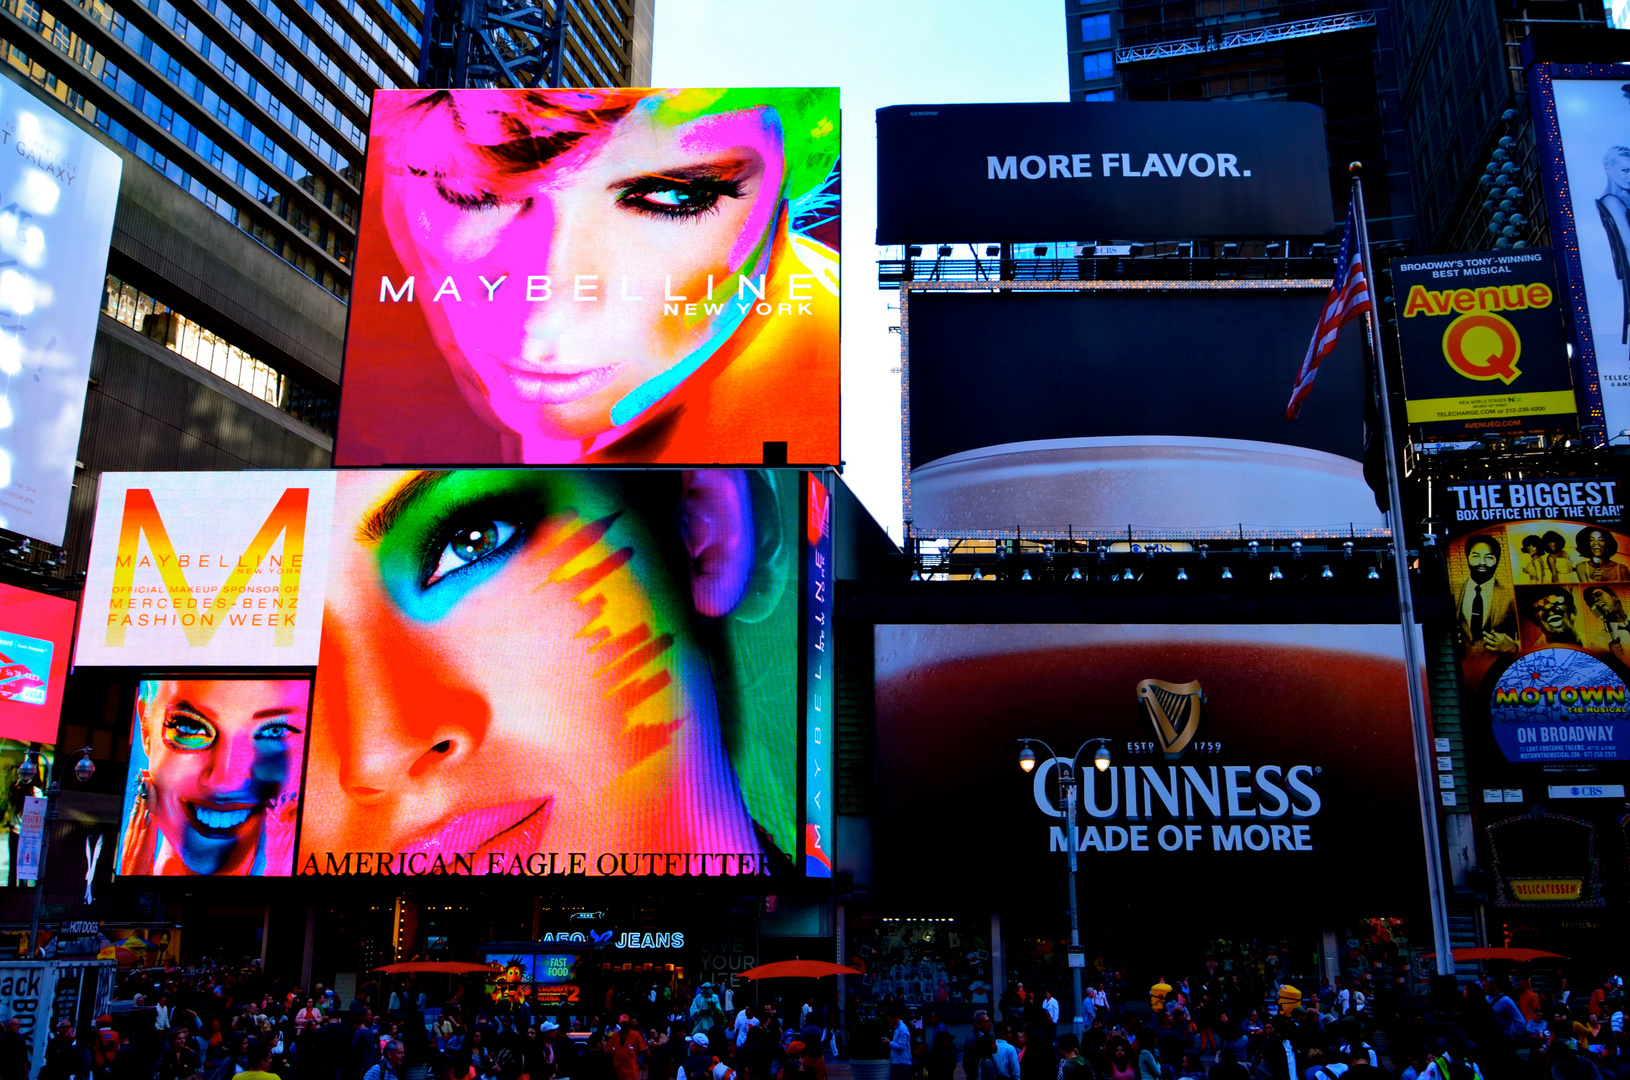 New York Time Square COLORFULL